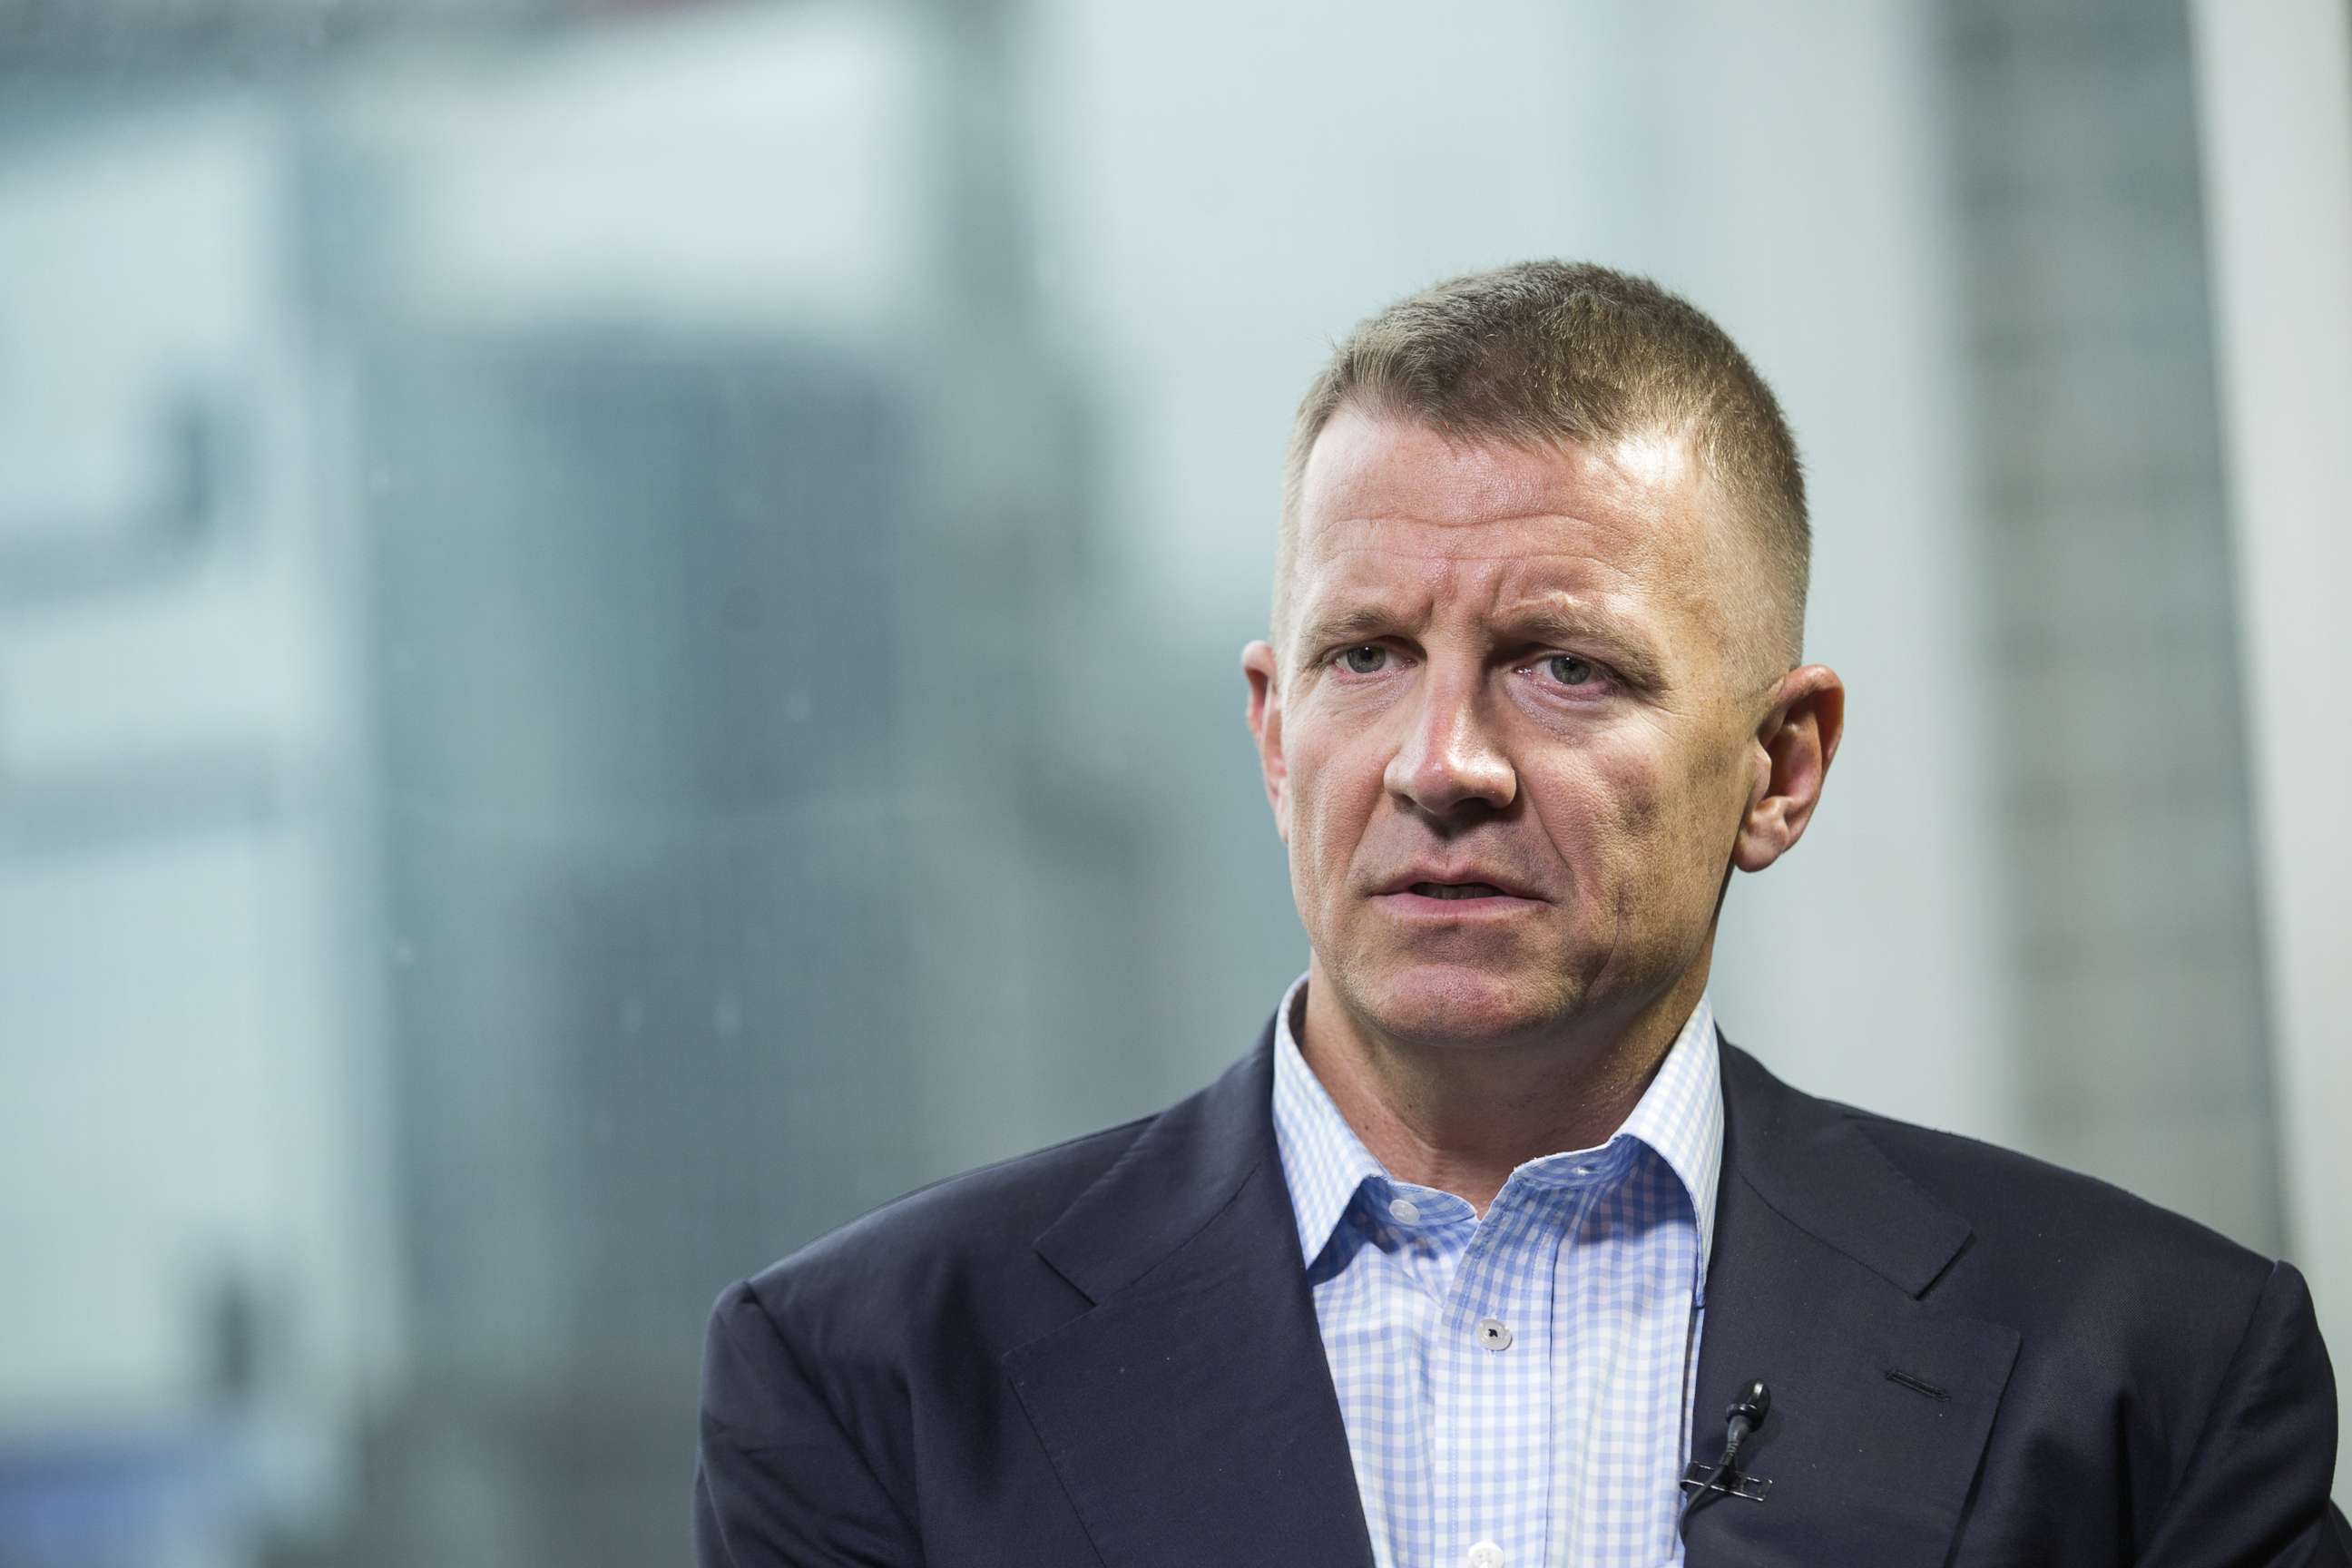 PHOTO: Erik Prince, chairman of Frontier Services Group Ltd., speaks during a Bloomberg Television interview in Hong Kong, China, on March 16, 2017.